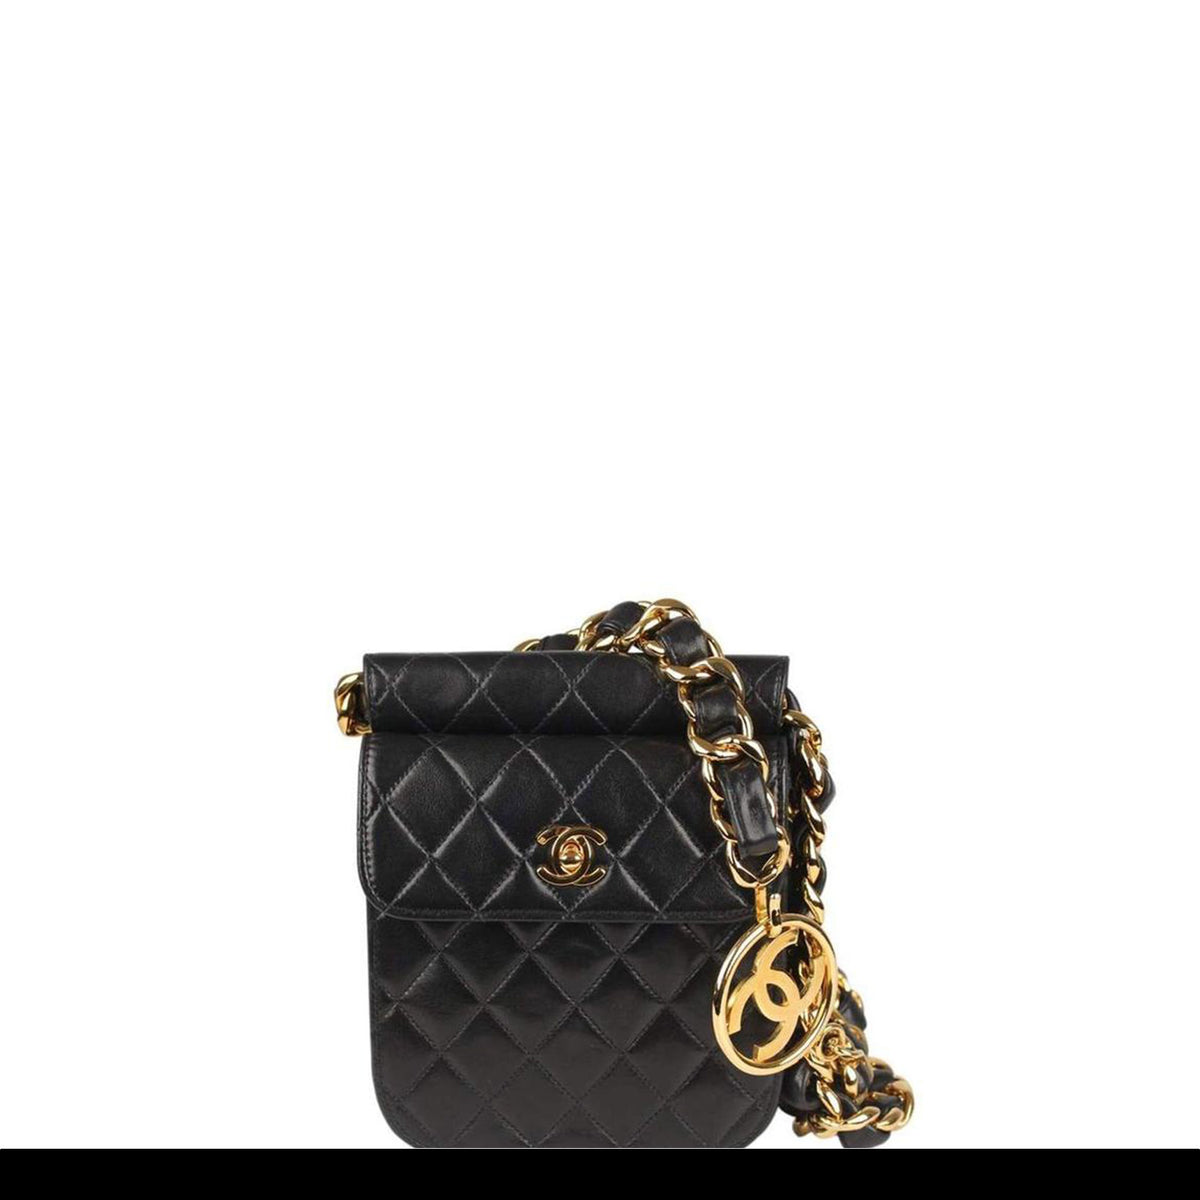 Sold at Auction: RARE C. 1990 CHANEL QUILTED LAMBSKIN BELT BAG